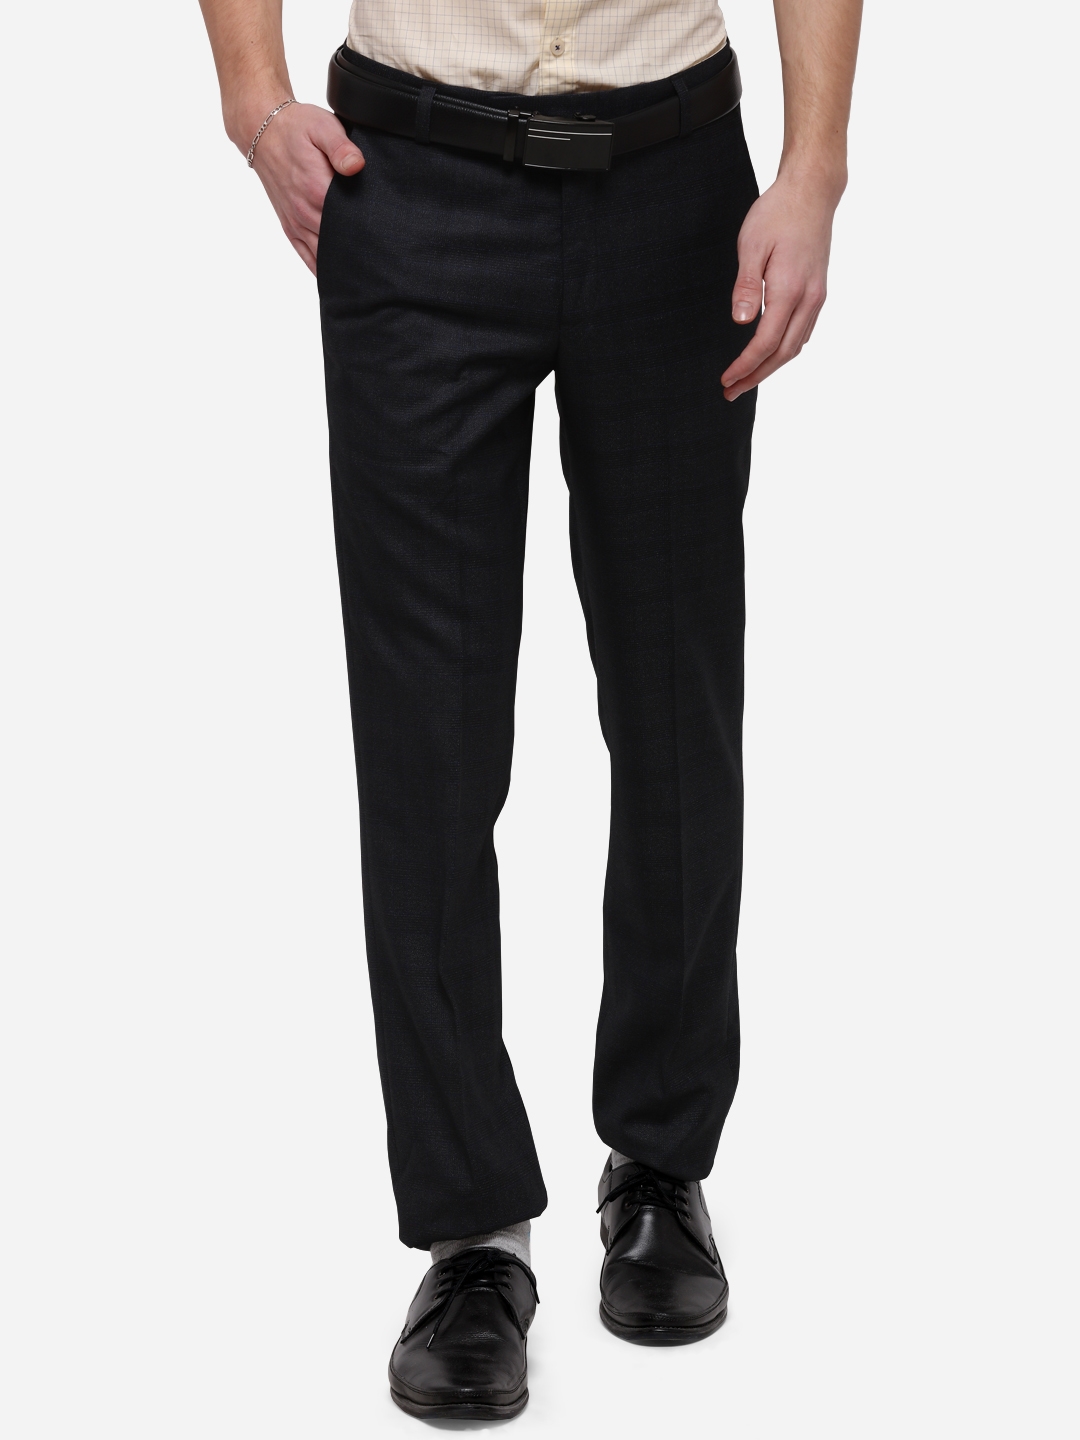 Metal | Beige Checked Formal Trousers (TMS90/2,D.GREY BLK CHEX)